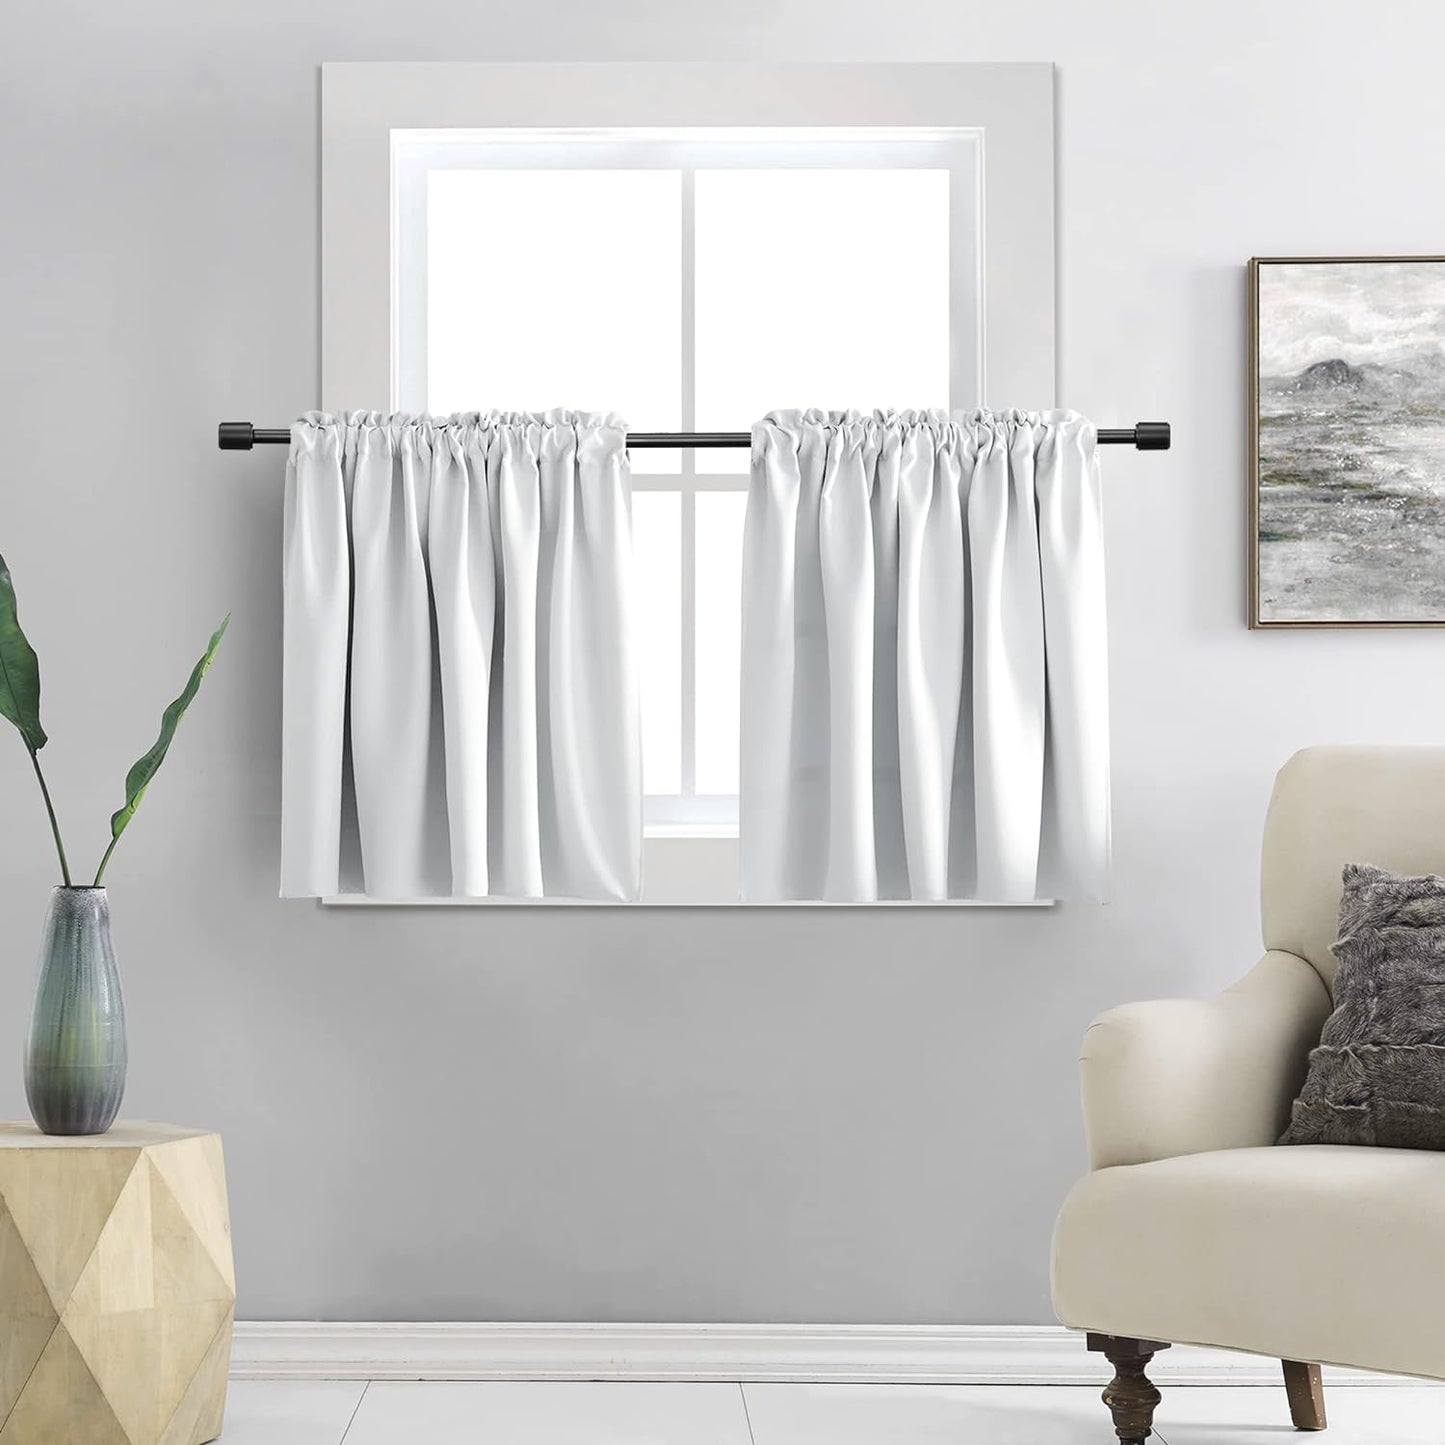 DONREN 24 Inch Length Curtains- 2 Panels Blackout Thermal Insulating Small Curtain Tiers for Bathroom with Rod Pocket (Black,42 Inch Width)  DONREN Offwhite 42" X 24" 